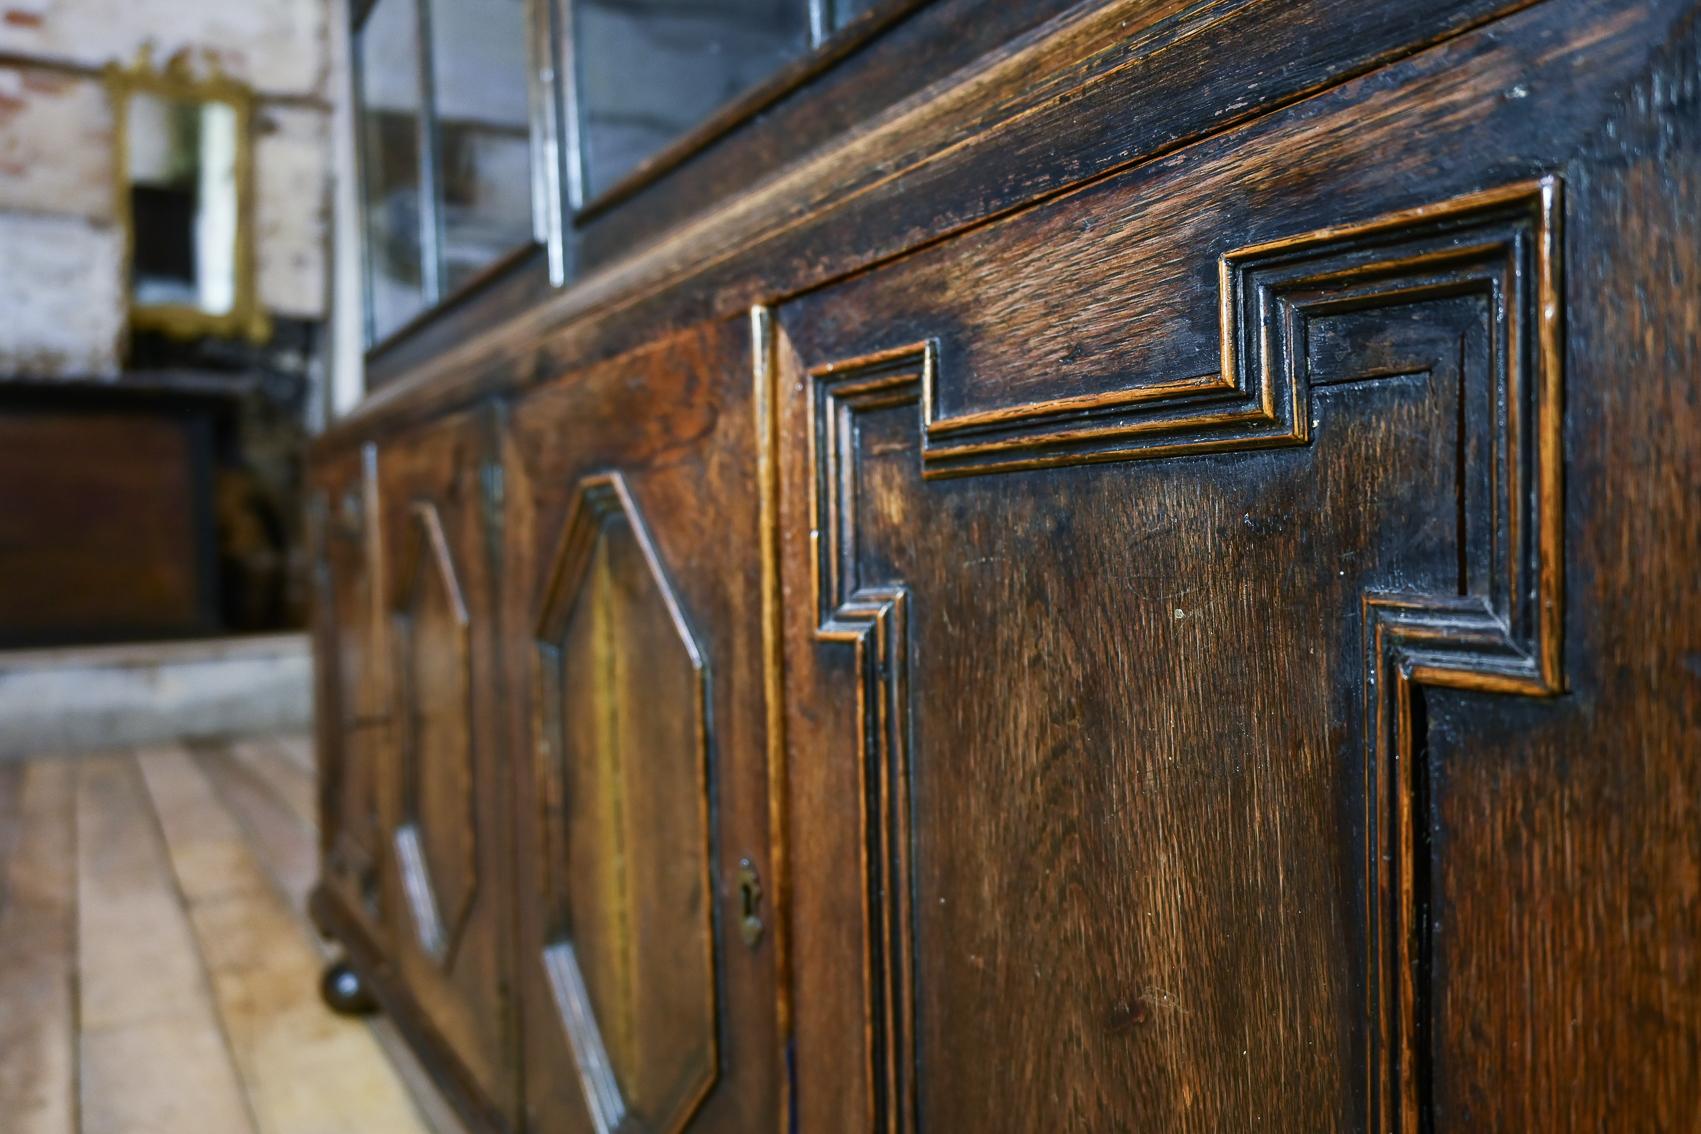 An Early 20th Century Glazed Oak Bookcase - In The Manner Of Samuel Pepys c.1910 For Sale 10